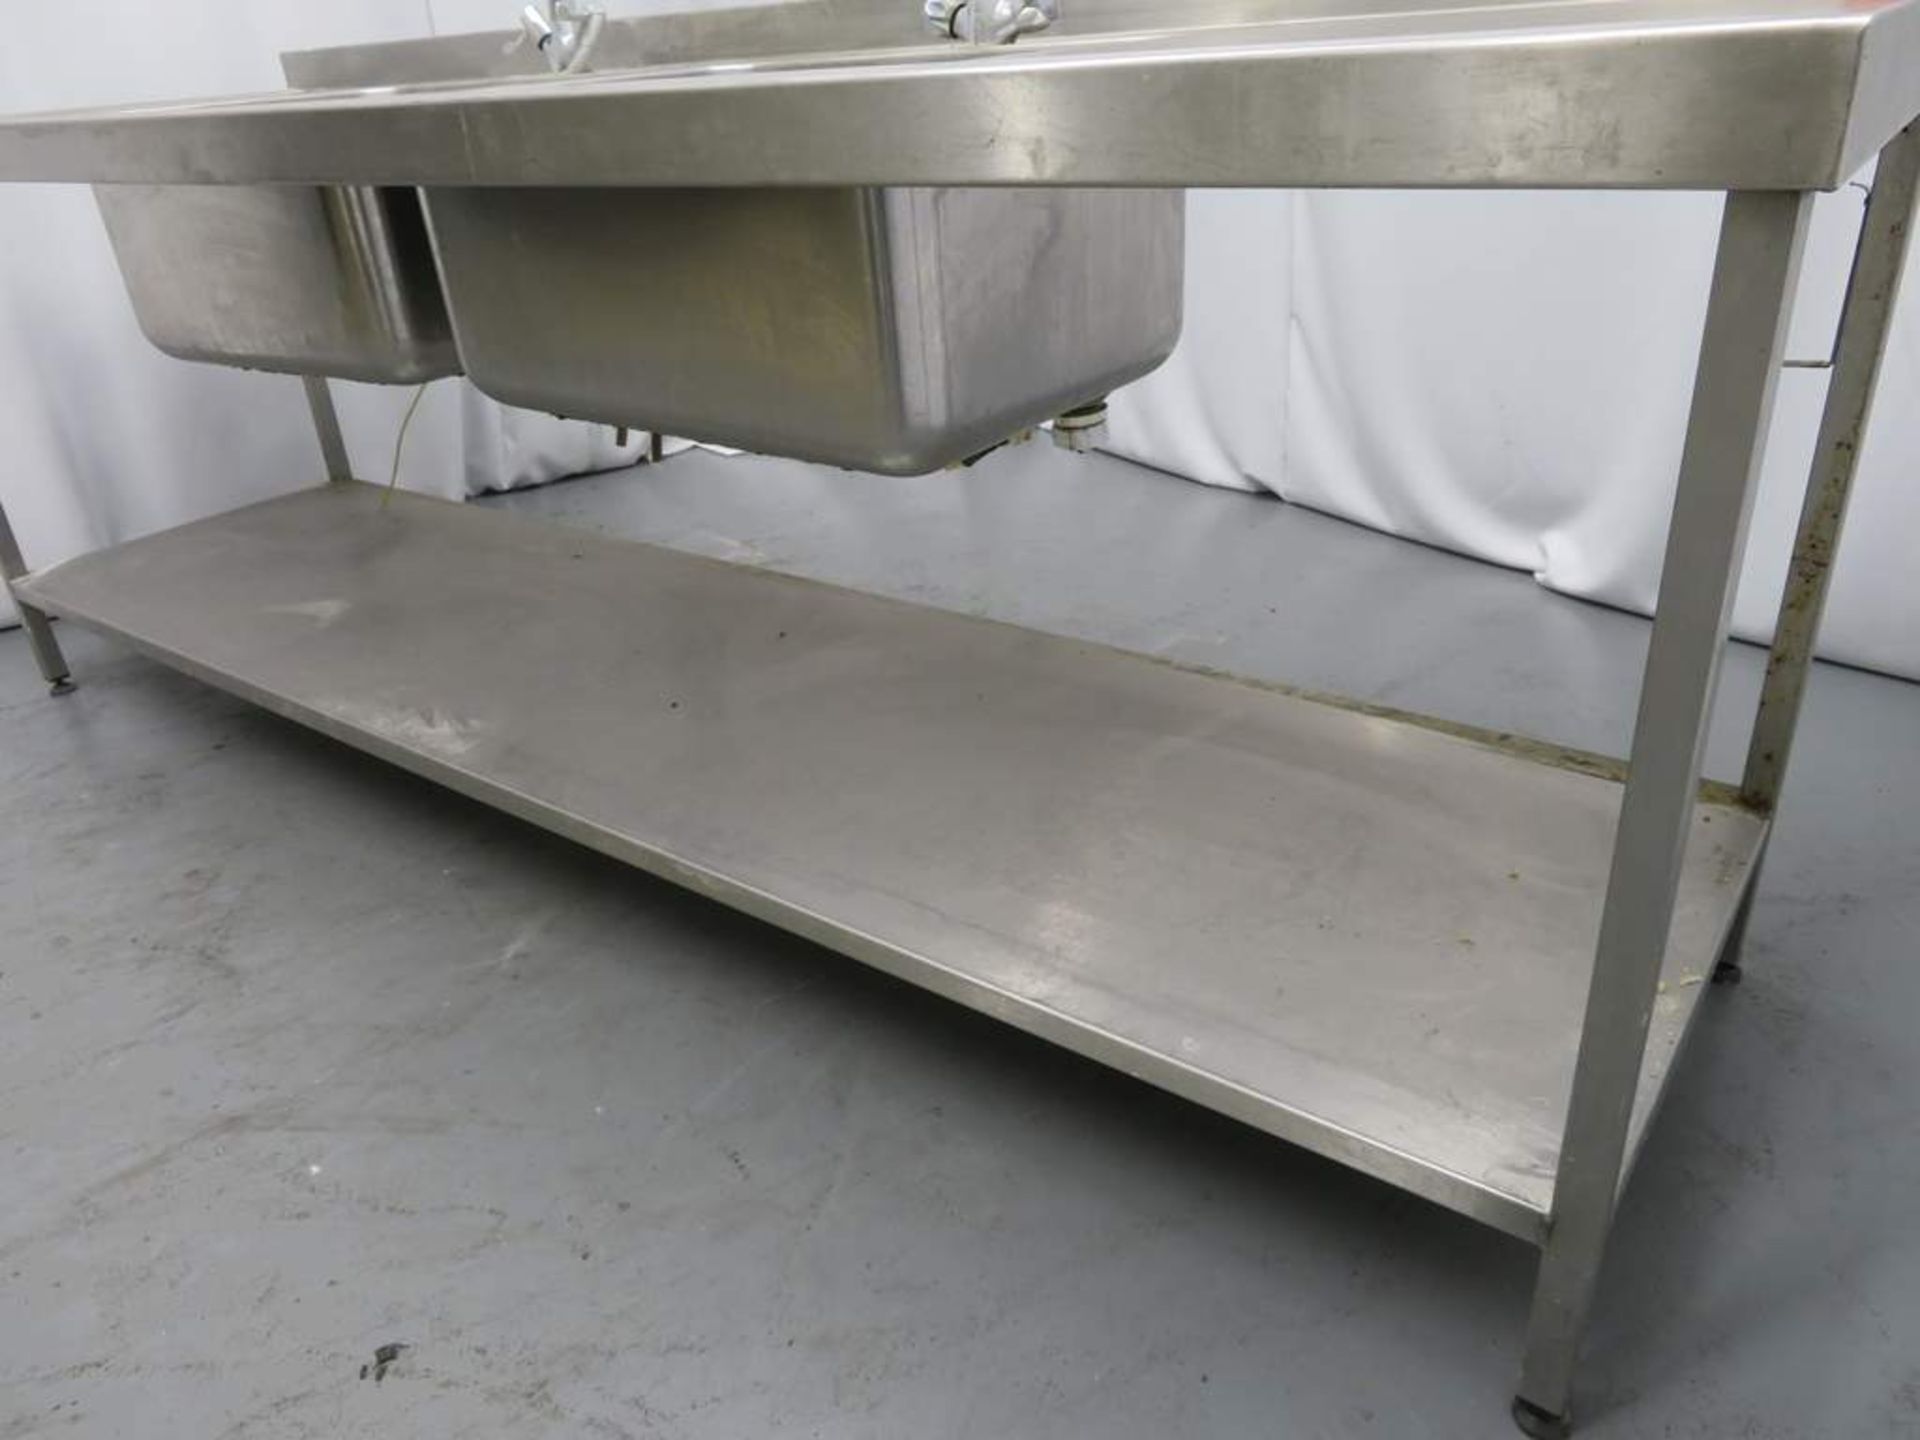 Stainless Steel Double Sink Unit. Dimensions: 2400x710x910mm (LxWxH) - Image 5 of 6